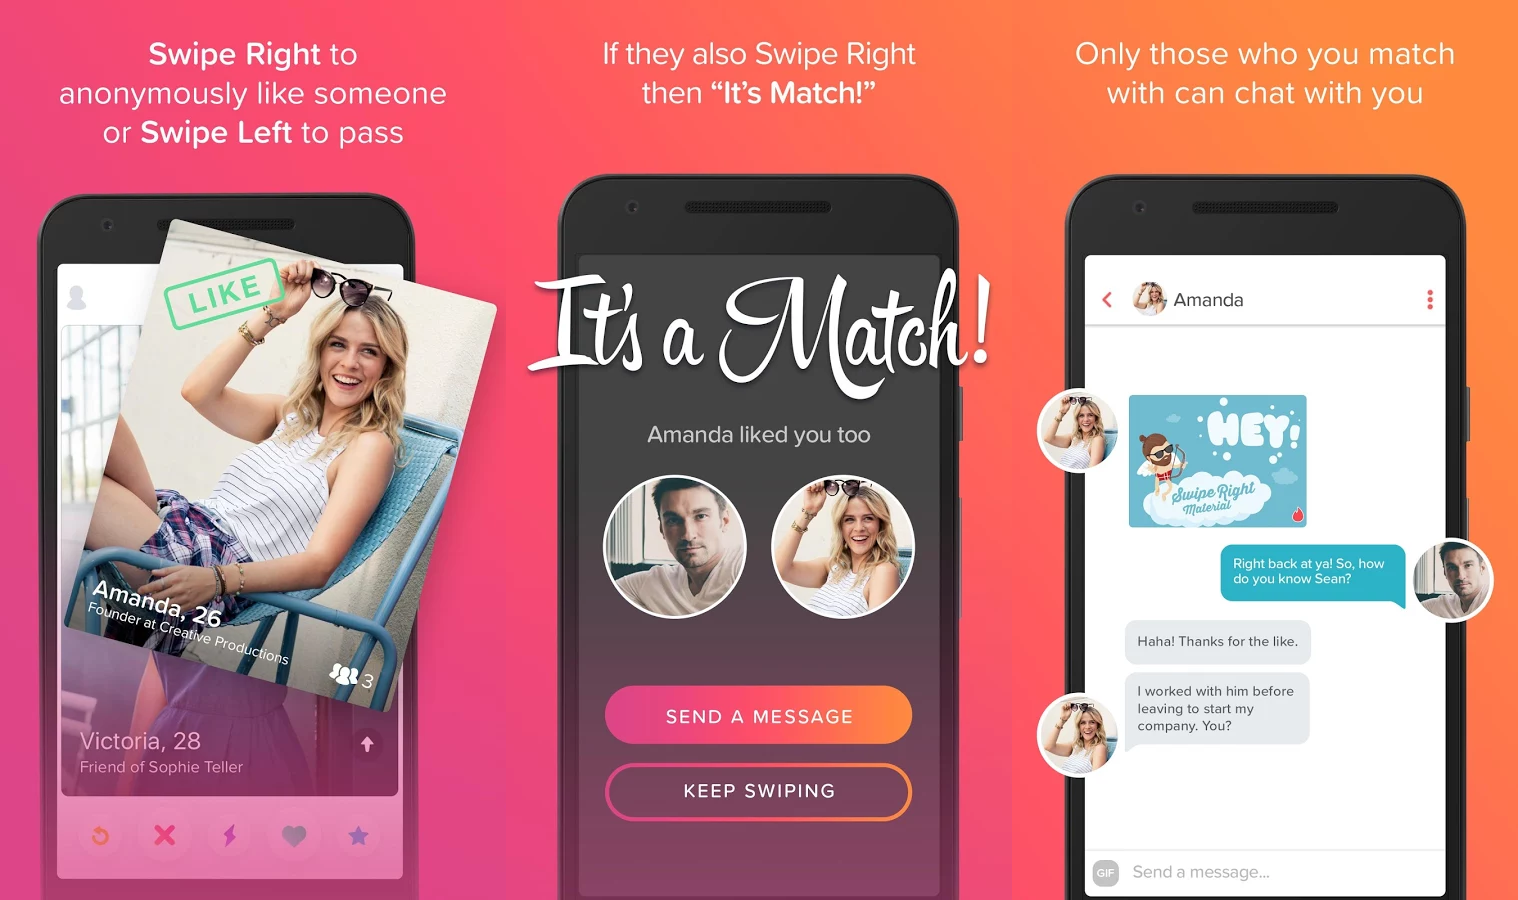 Gute dating-apps für android